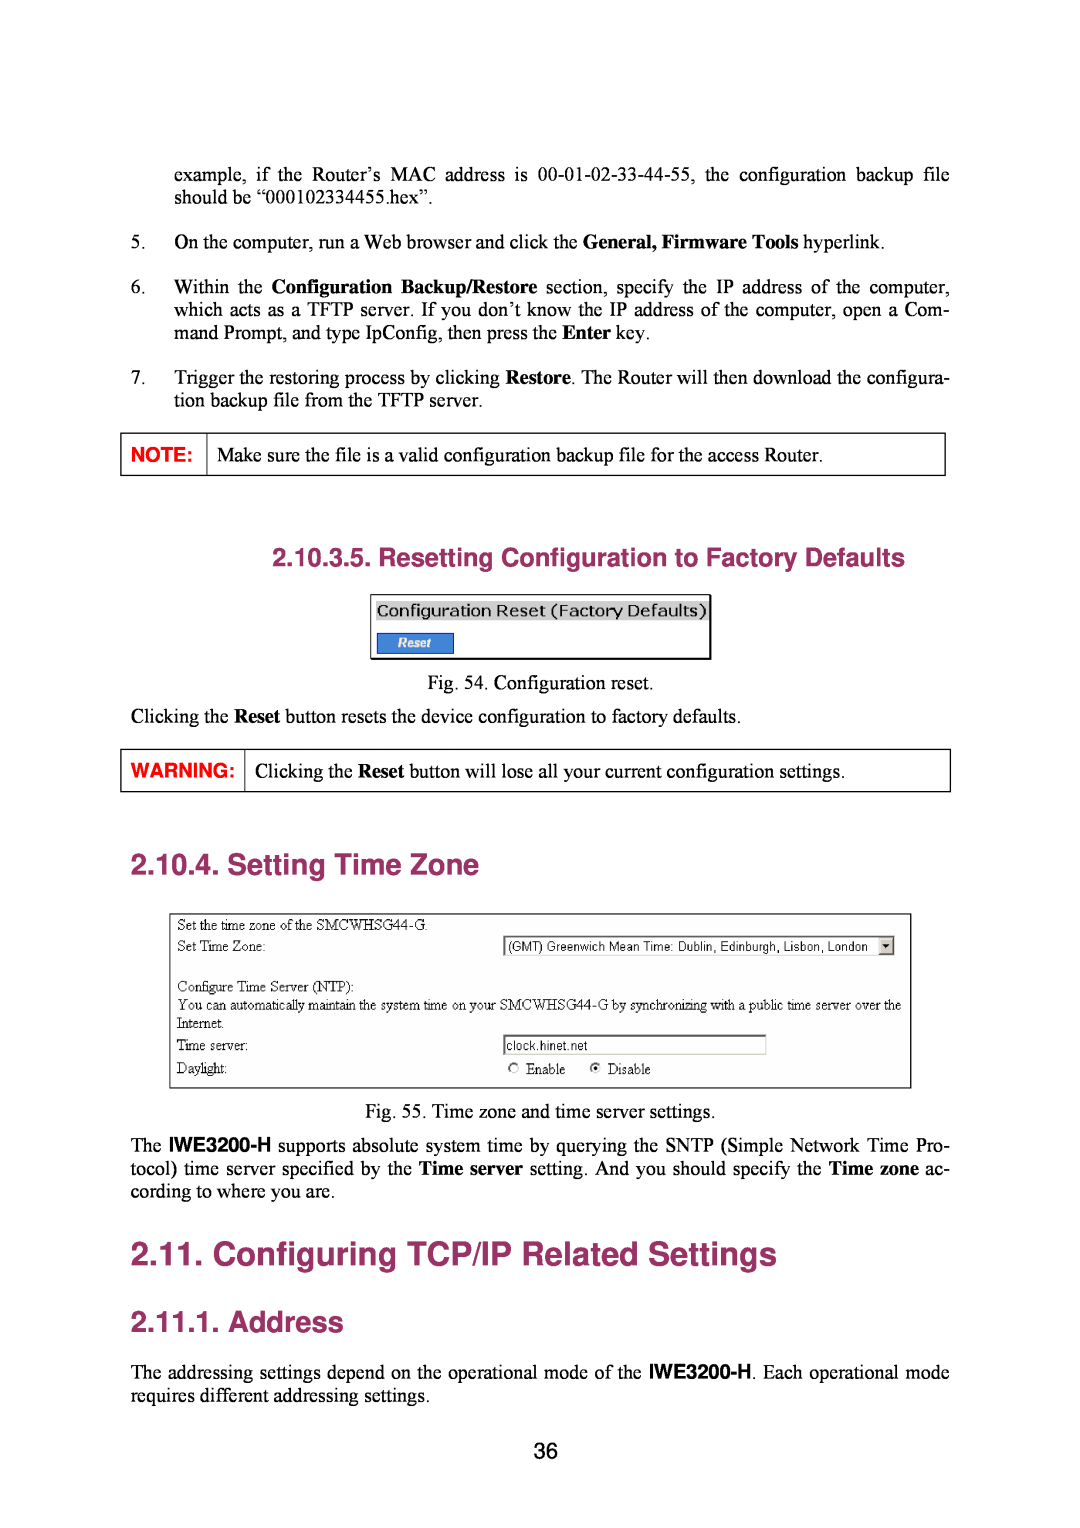 Epson IWE3200-H manual Configuring TCP/IP Related Settings, Setting Time Zone, Address 